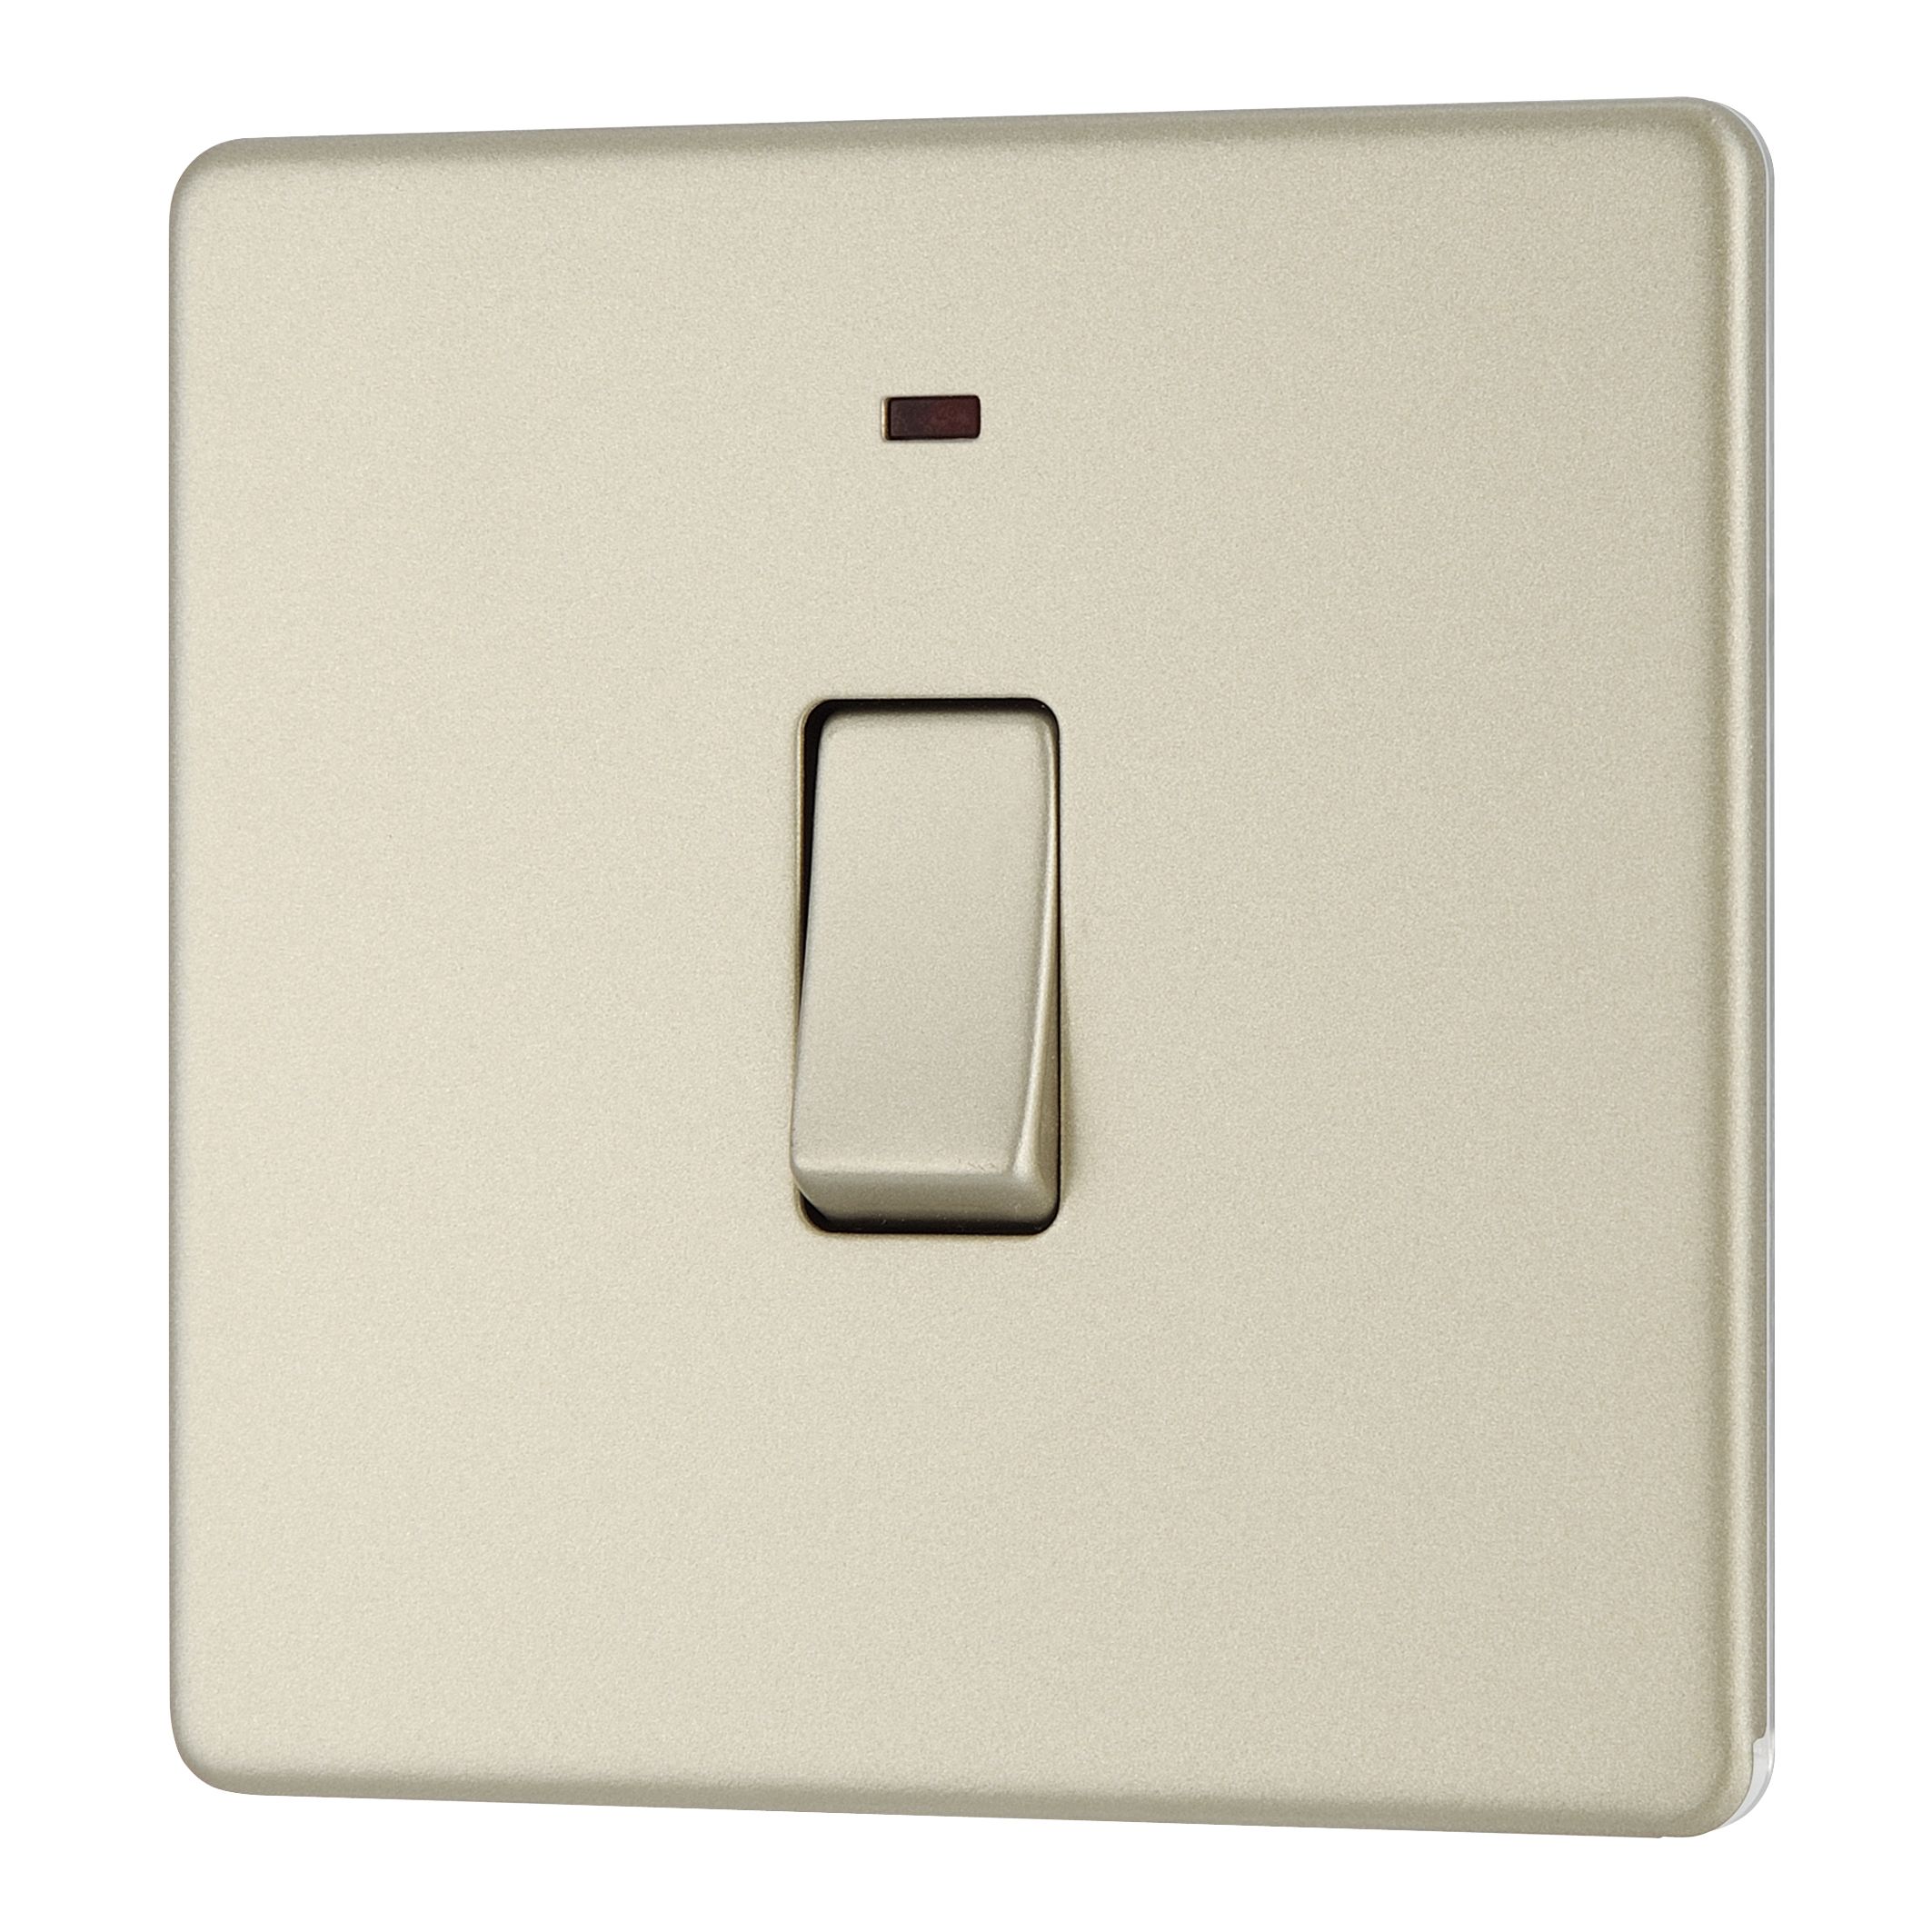 Colours 20A 1 way Polished nickel effect Single Switch